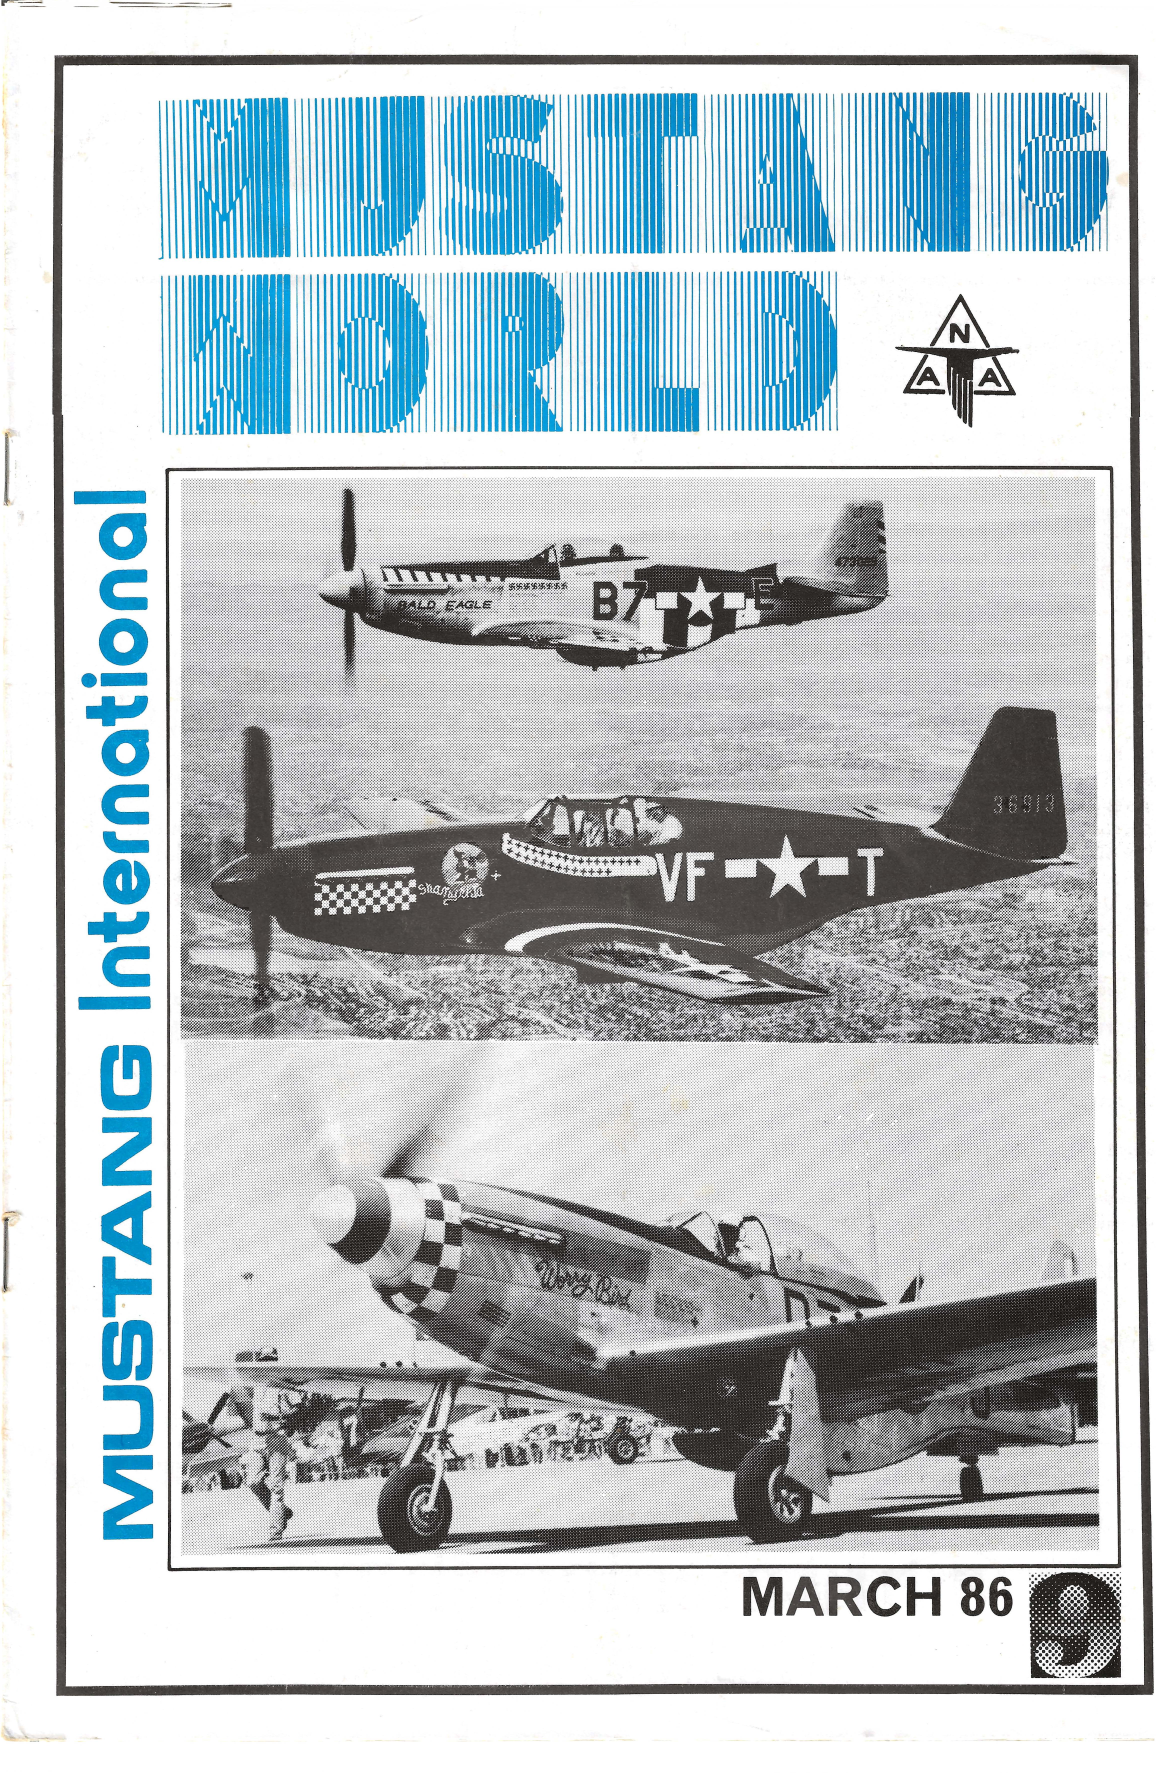 Sample page 1 from AirCorps Library document: Mustang World - Issue 9